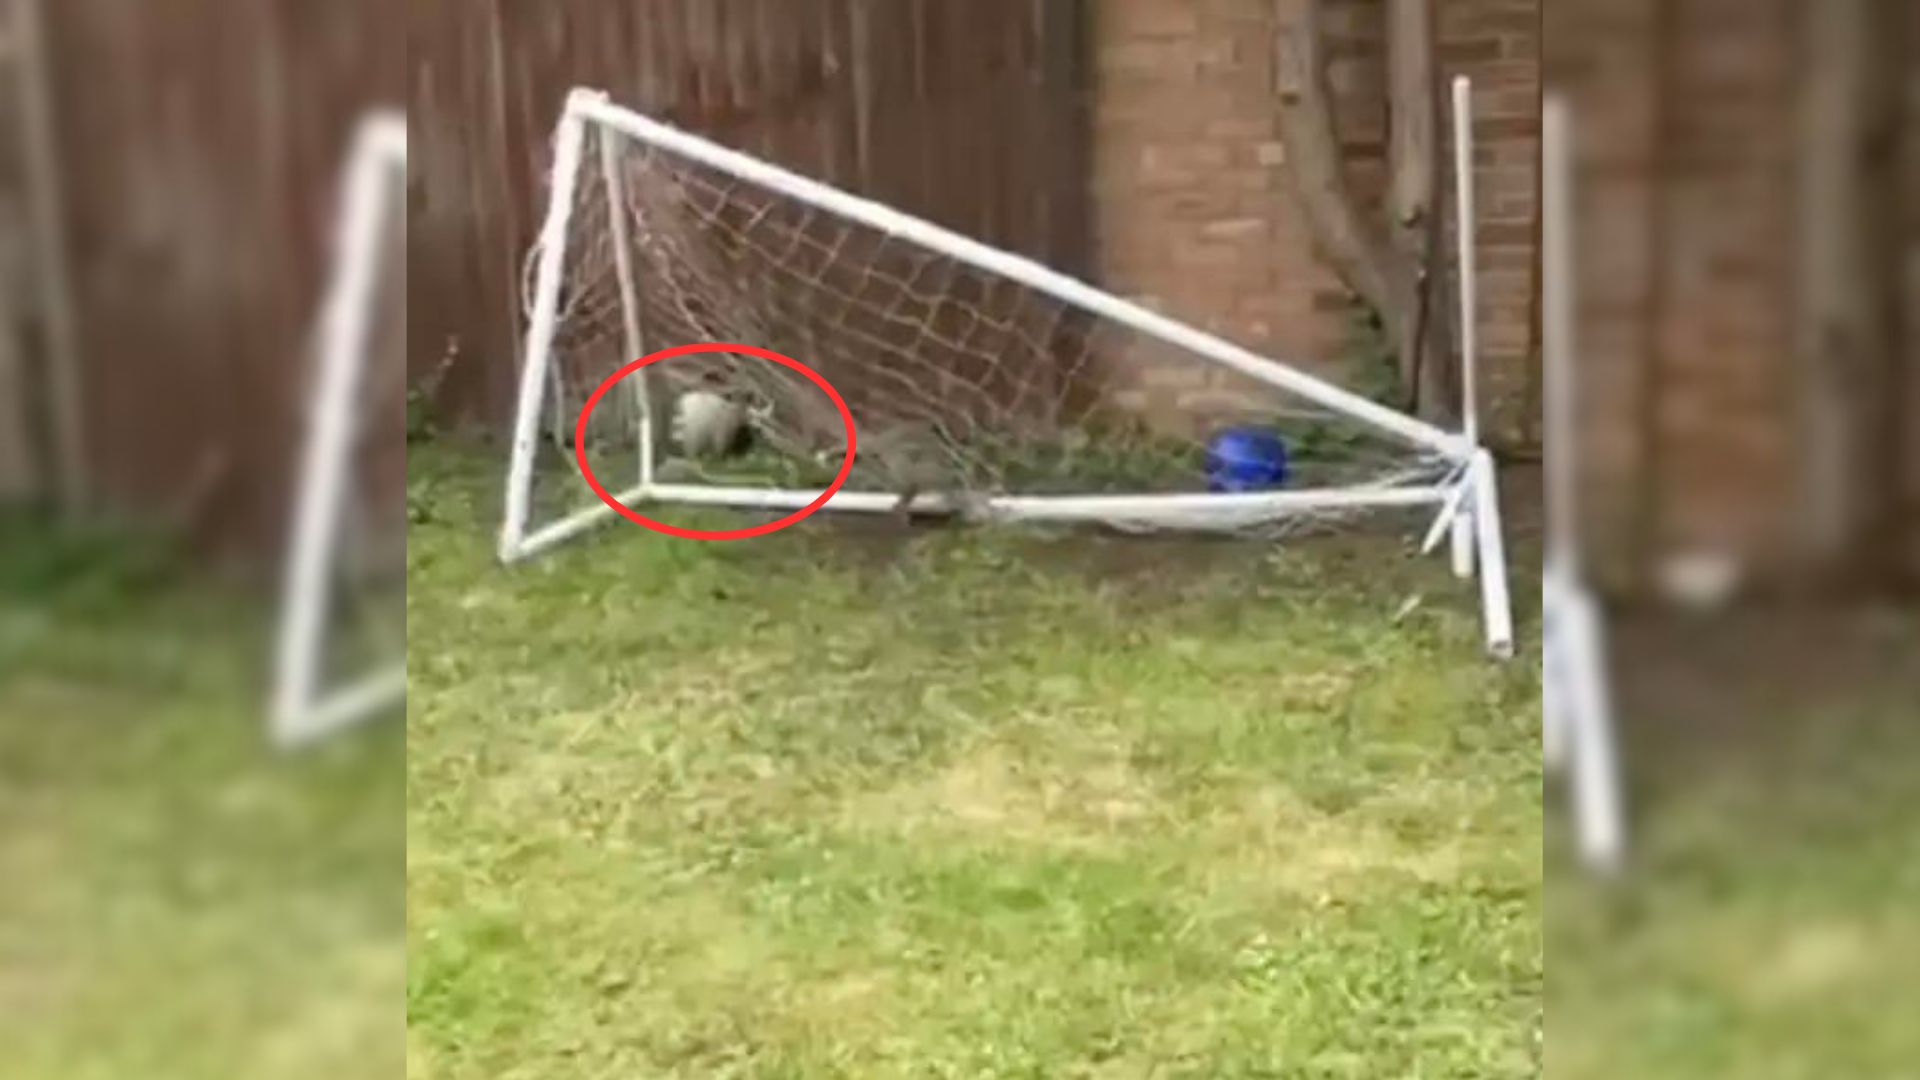 A Fluffy Cub Entangled In A Soccer Net Forced Rescuers To React Quickly